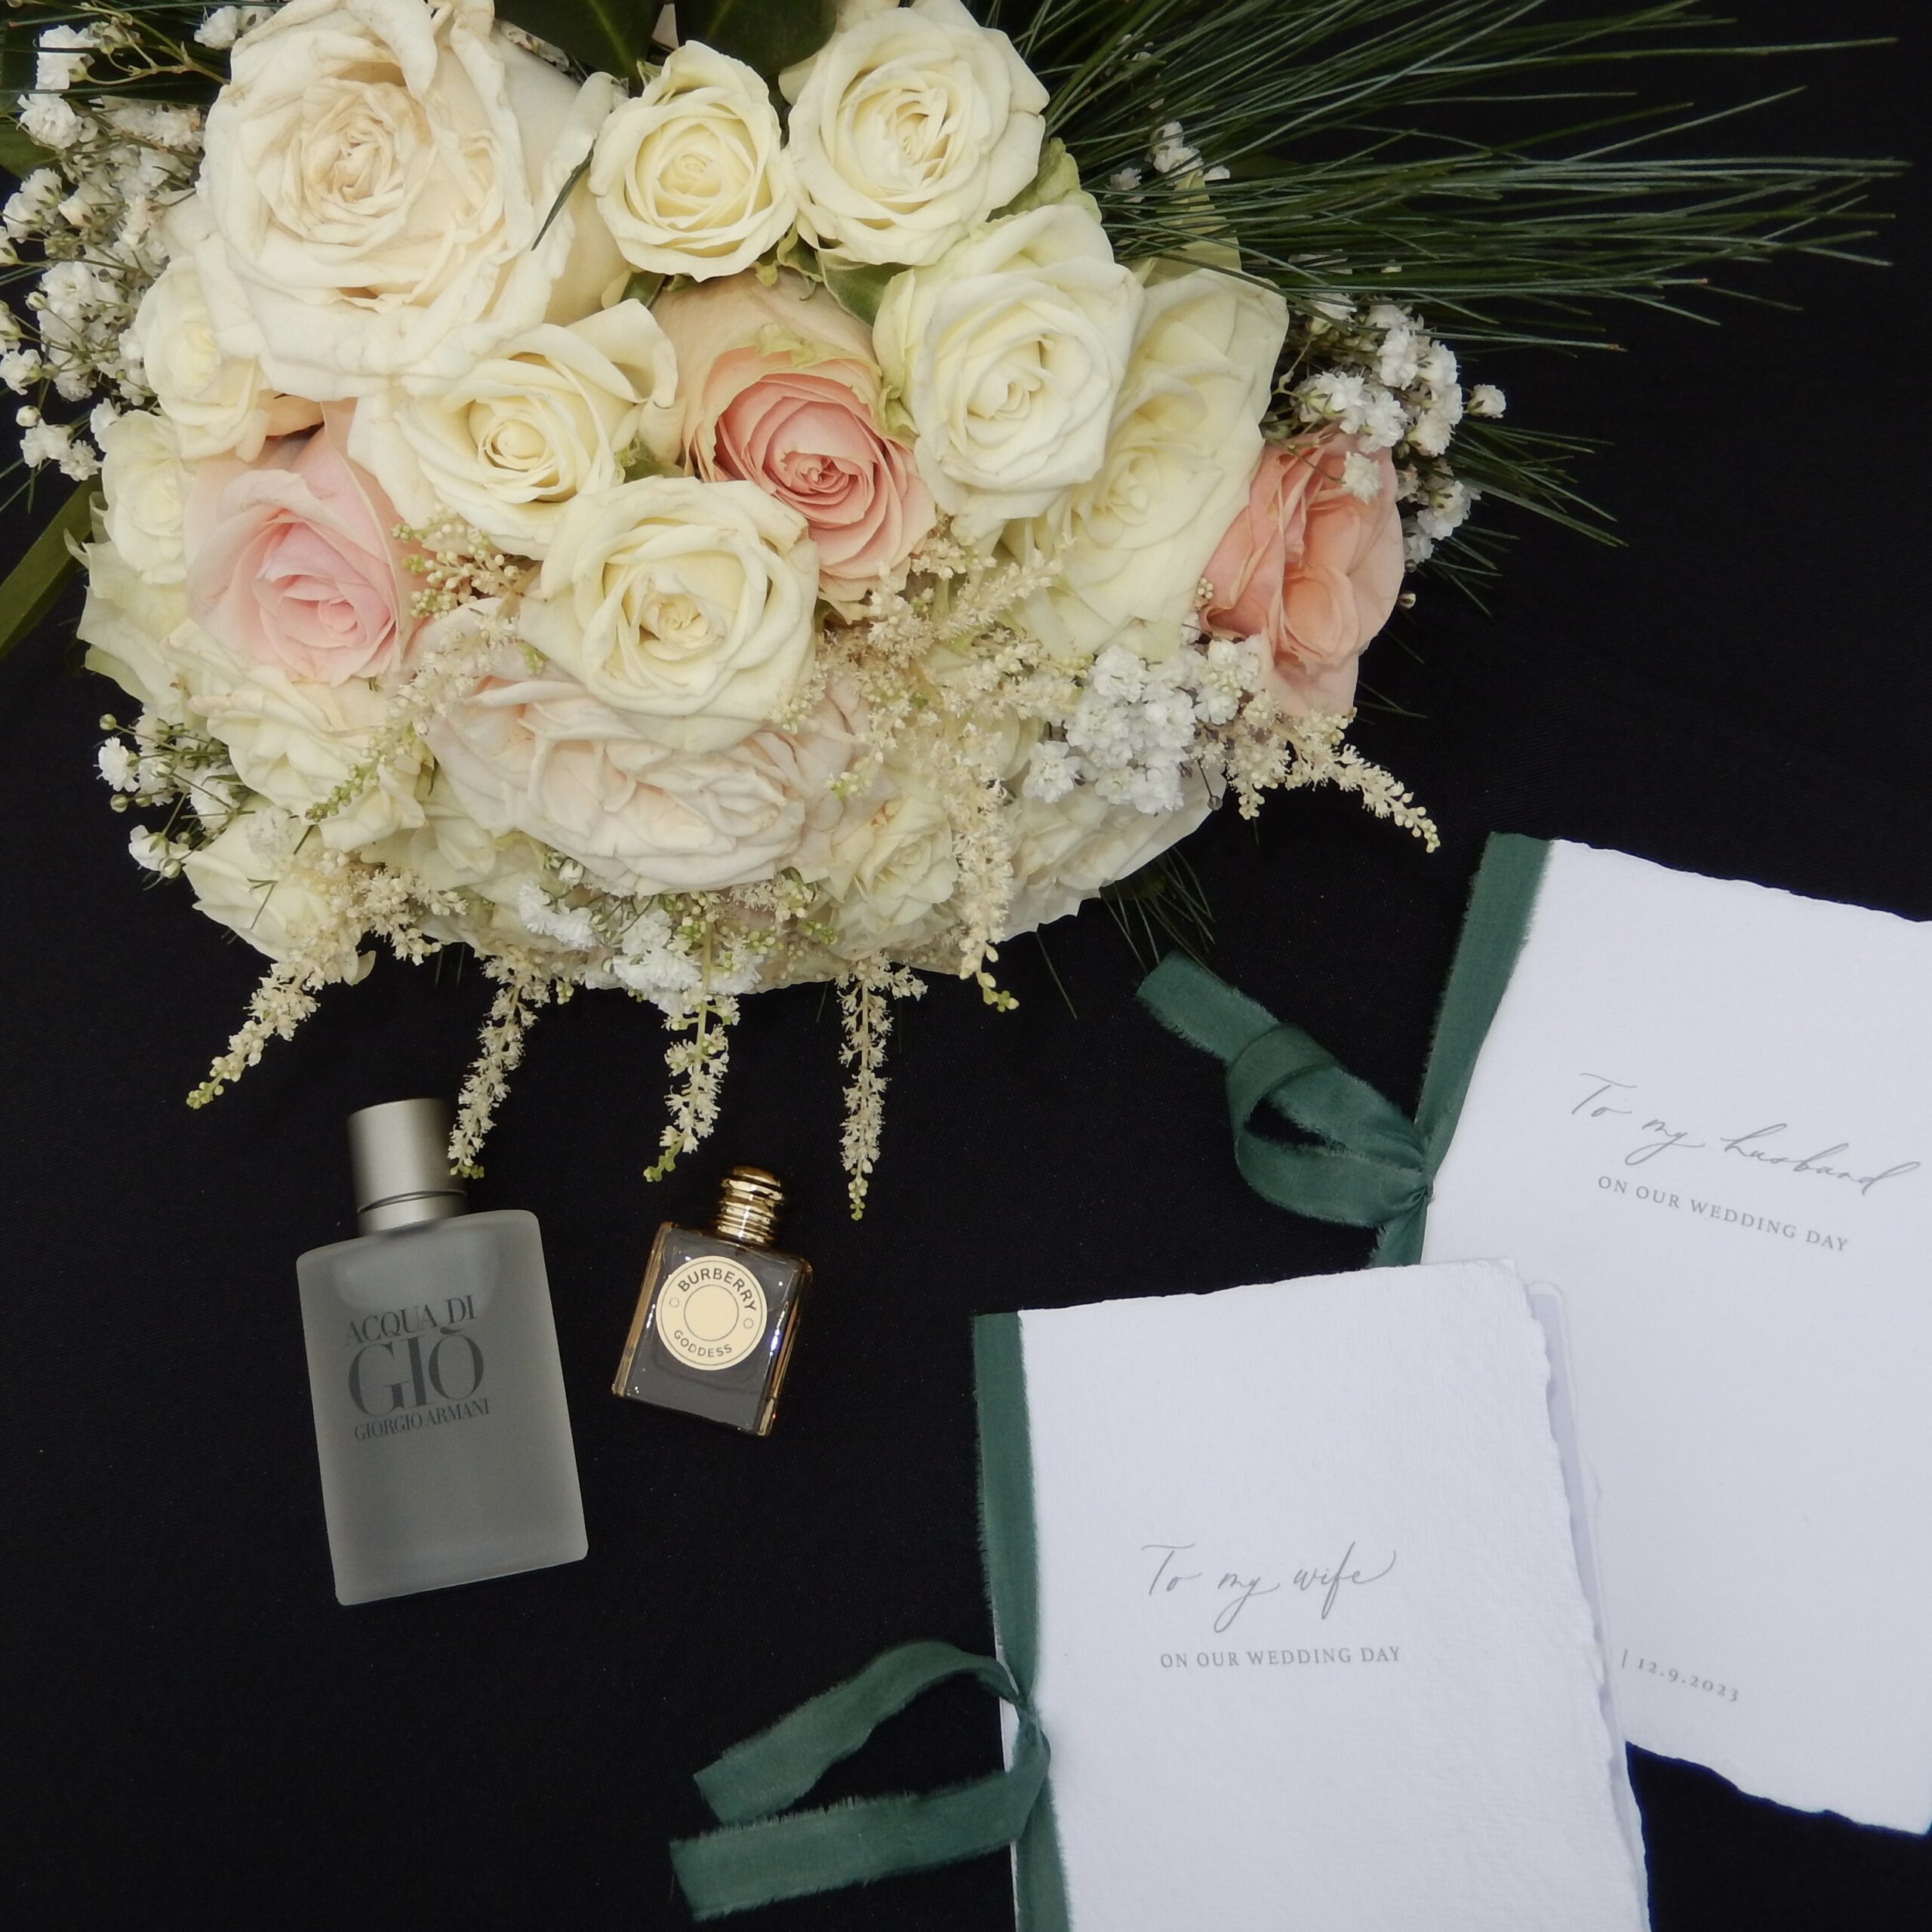 wedding details including vow books, bridal bouquet, perfume and cologne